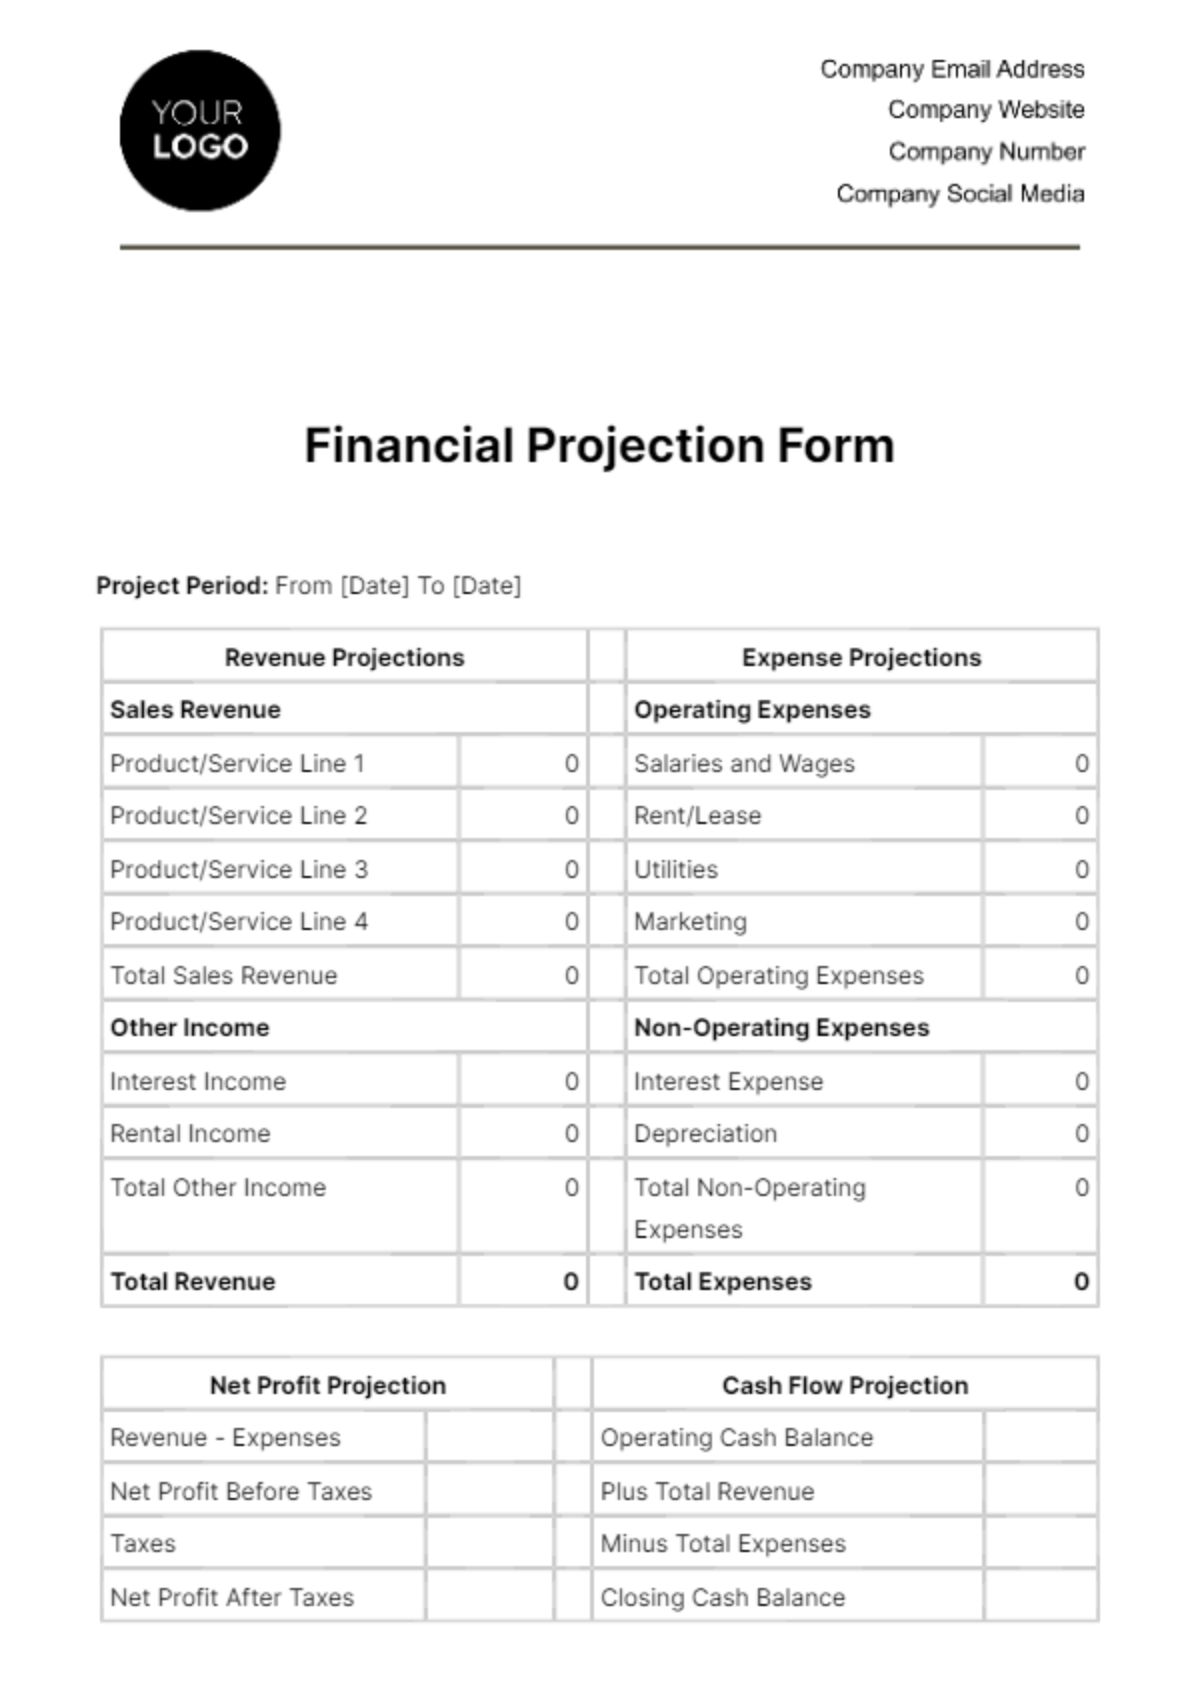 Financial Projection Form Template